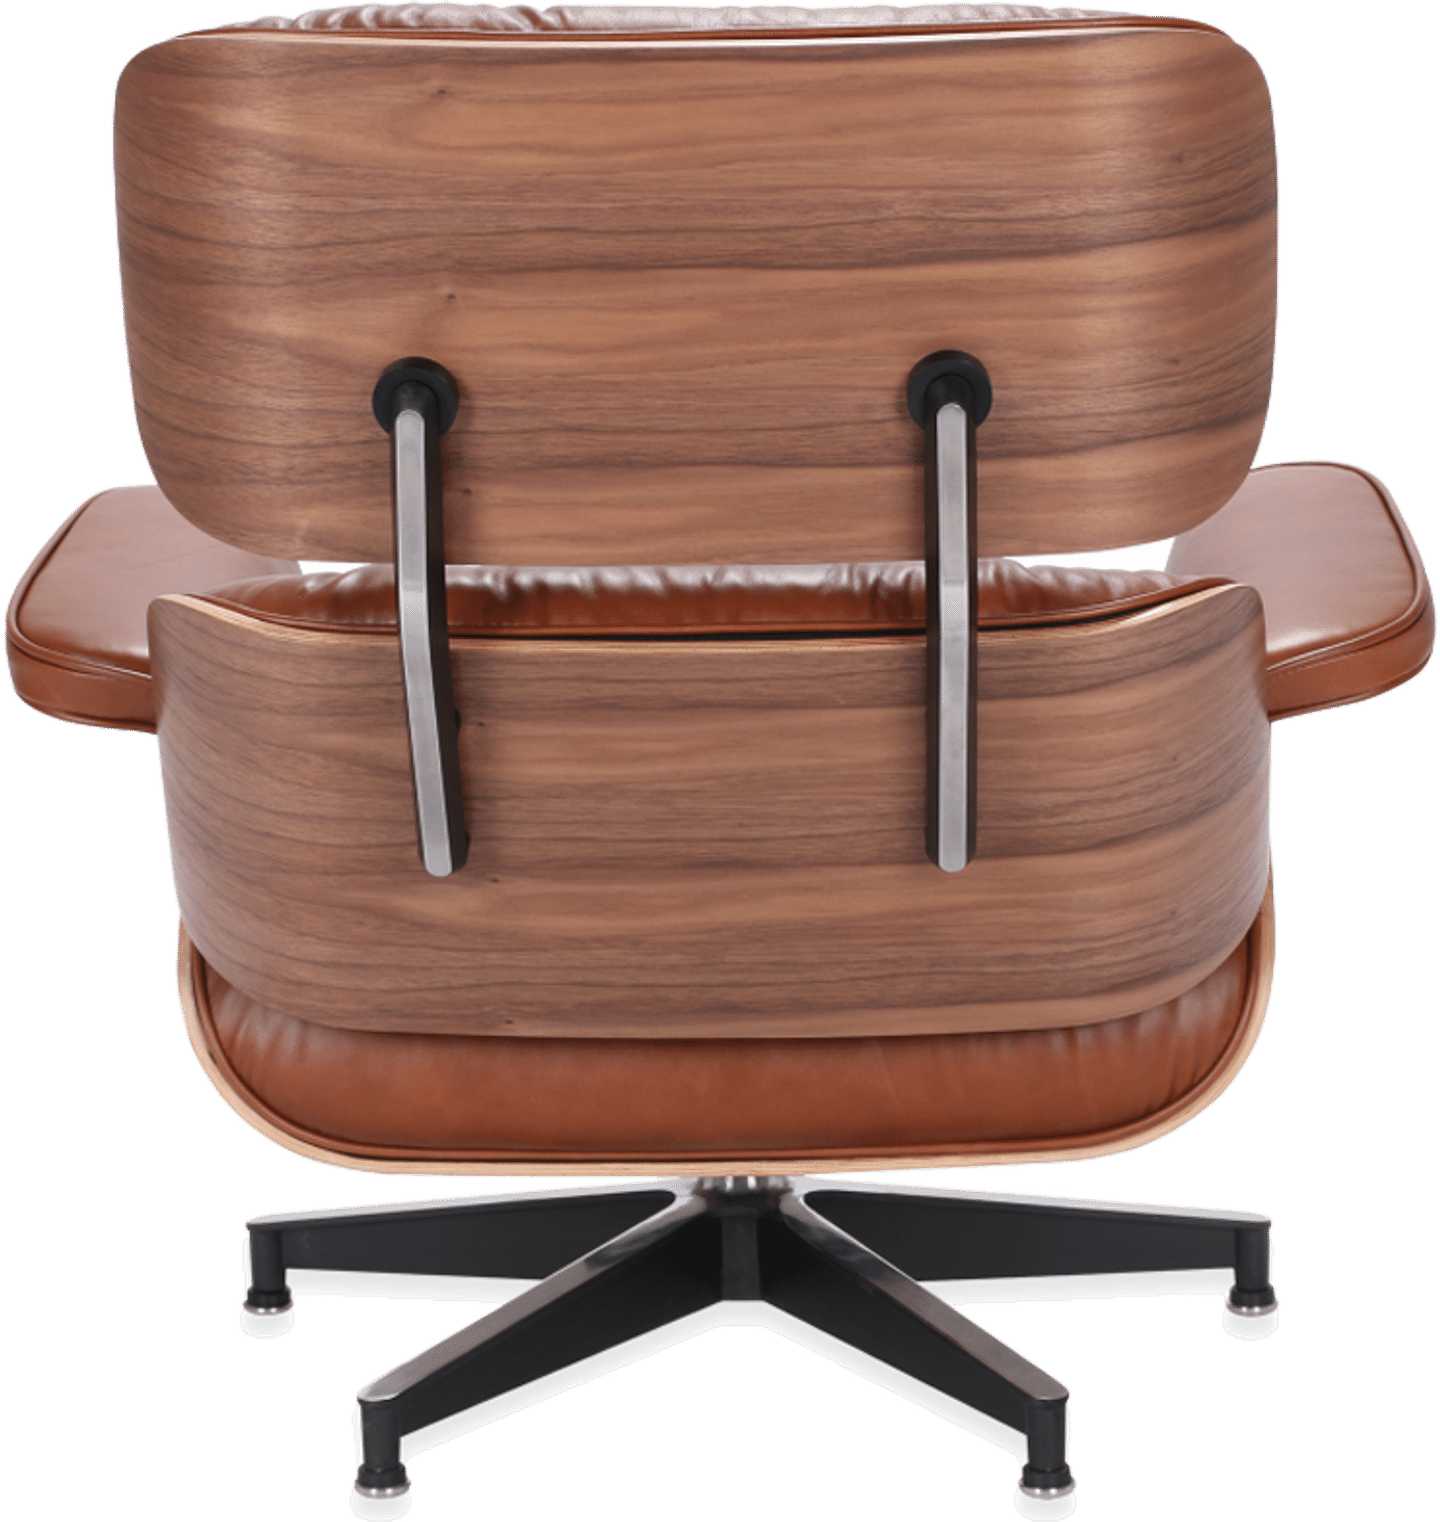 Eames Style Lounge Chair H Miller Version Premium Leather/Tan/Rosewood image.